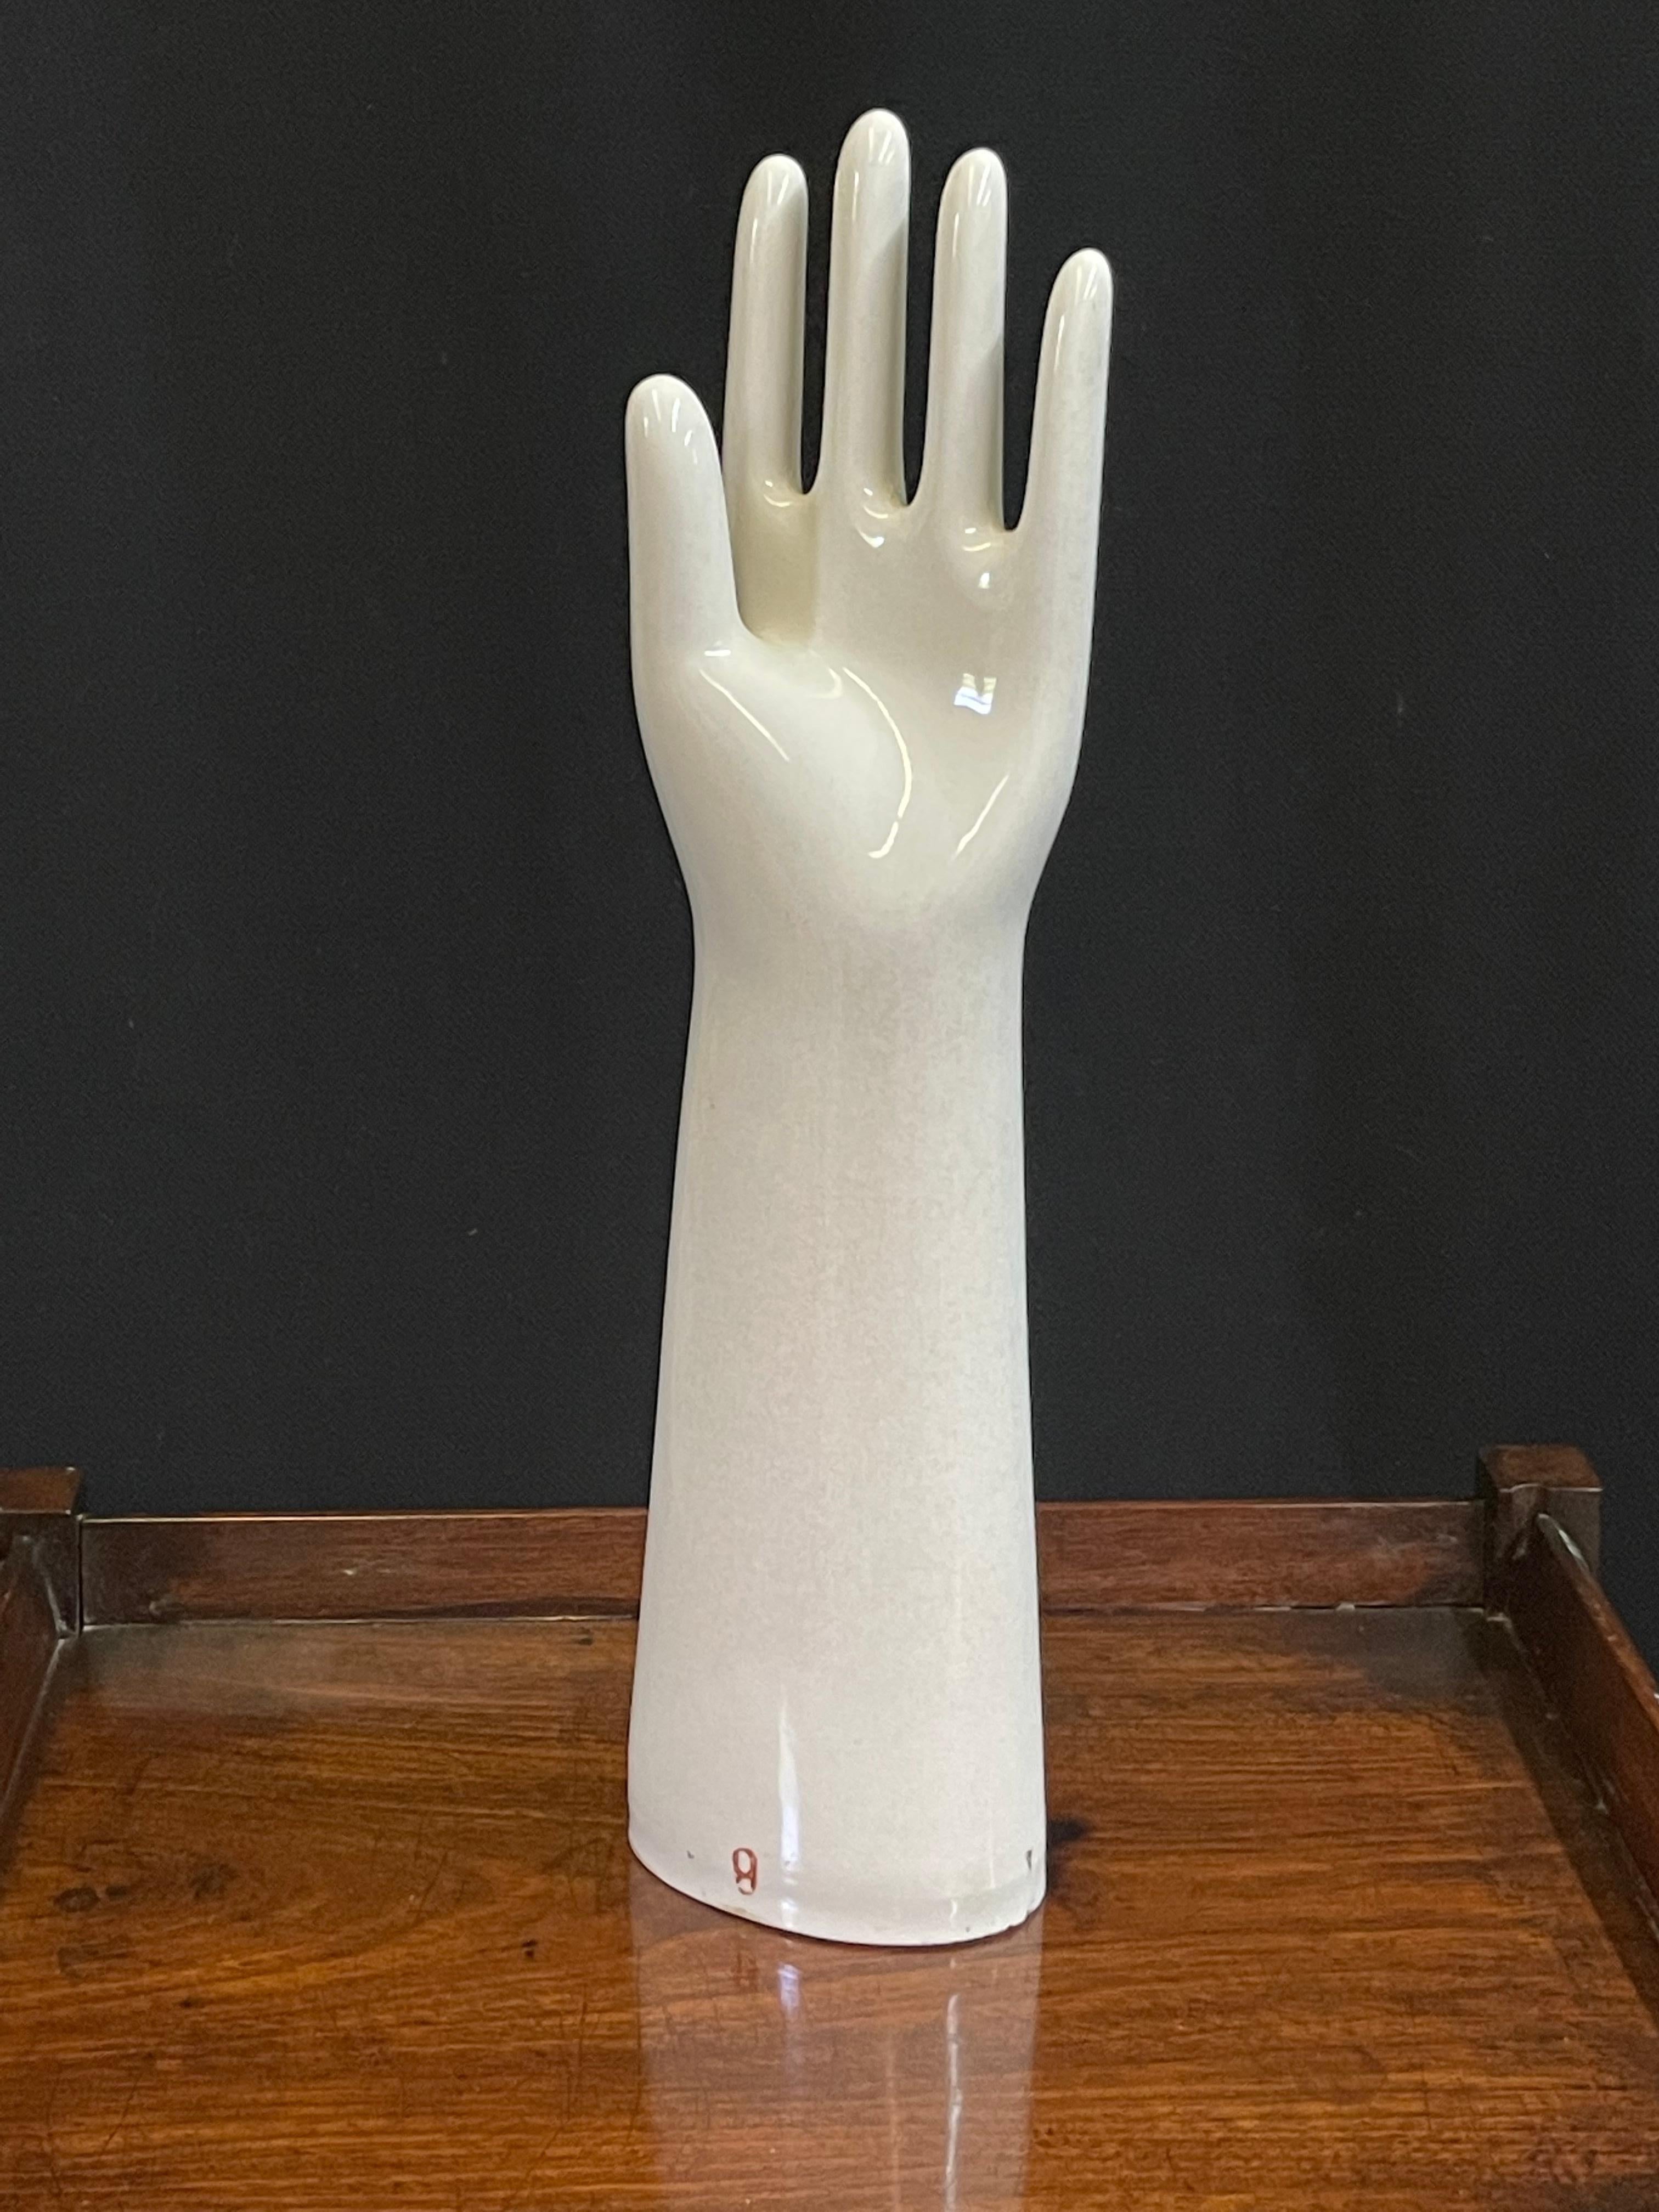 Large midcentury left hand industrial glove mold made of white porcelain and stamped in red ‘PATENT 2261583 February 3, 1944.’

The mold measures 17.5